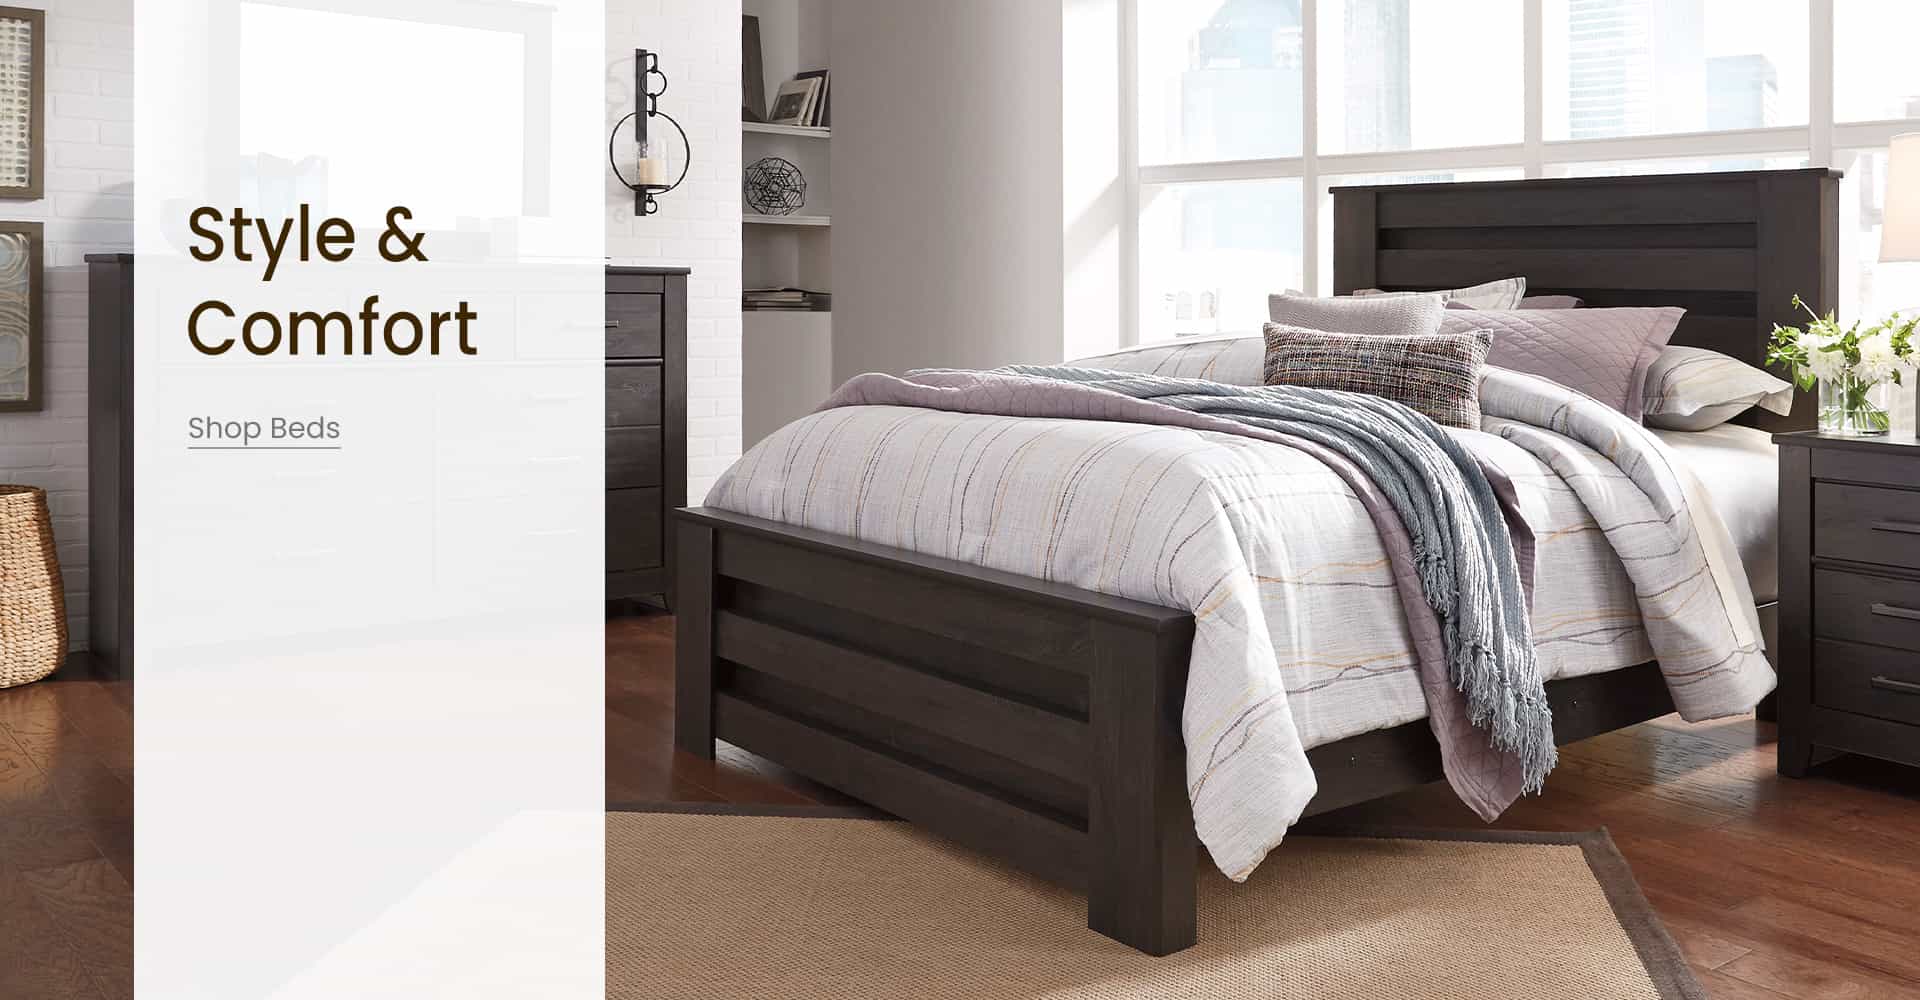 Style & Comfort Shop Beds